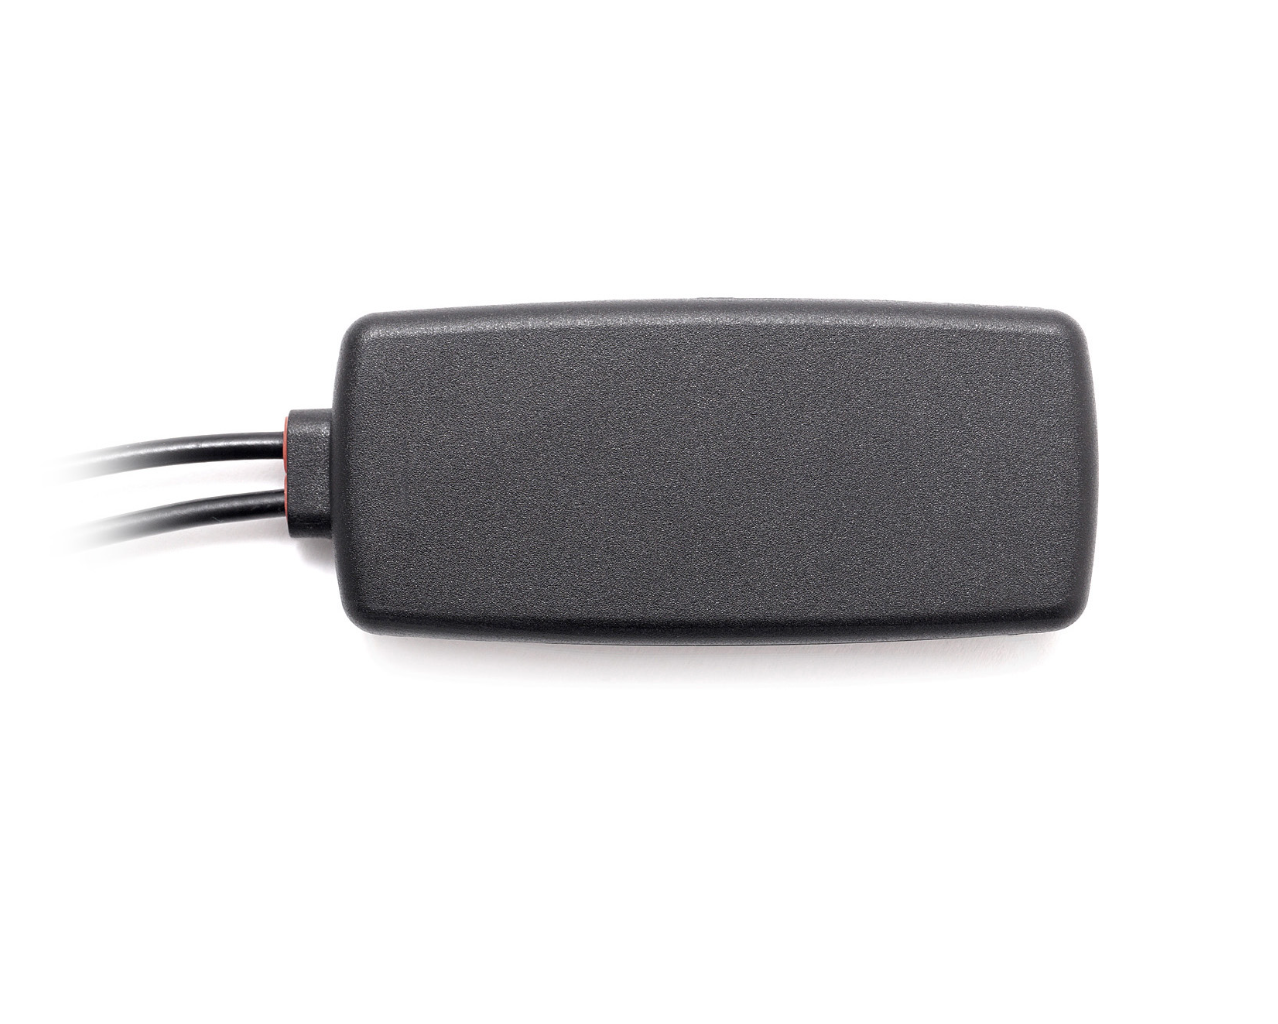 GPS & 5G/4G 2-in-1 Antenna for Dashboard/Windshield 10 ft Cables & SMA. Dual-Pass RF. Adhesive Mount. R2G5A-10SSM